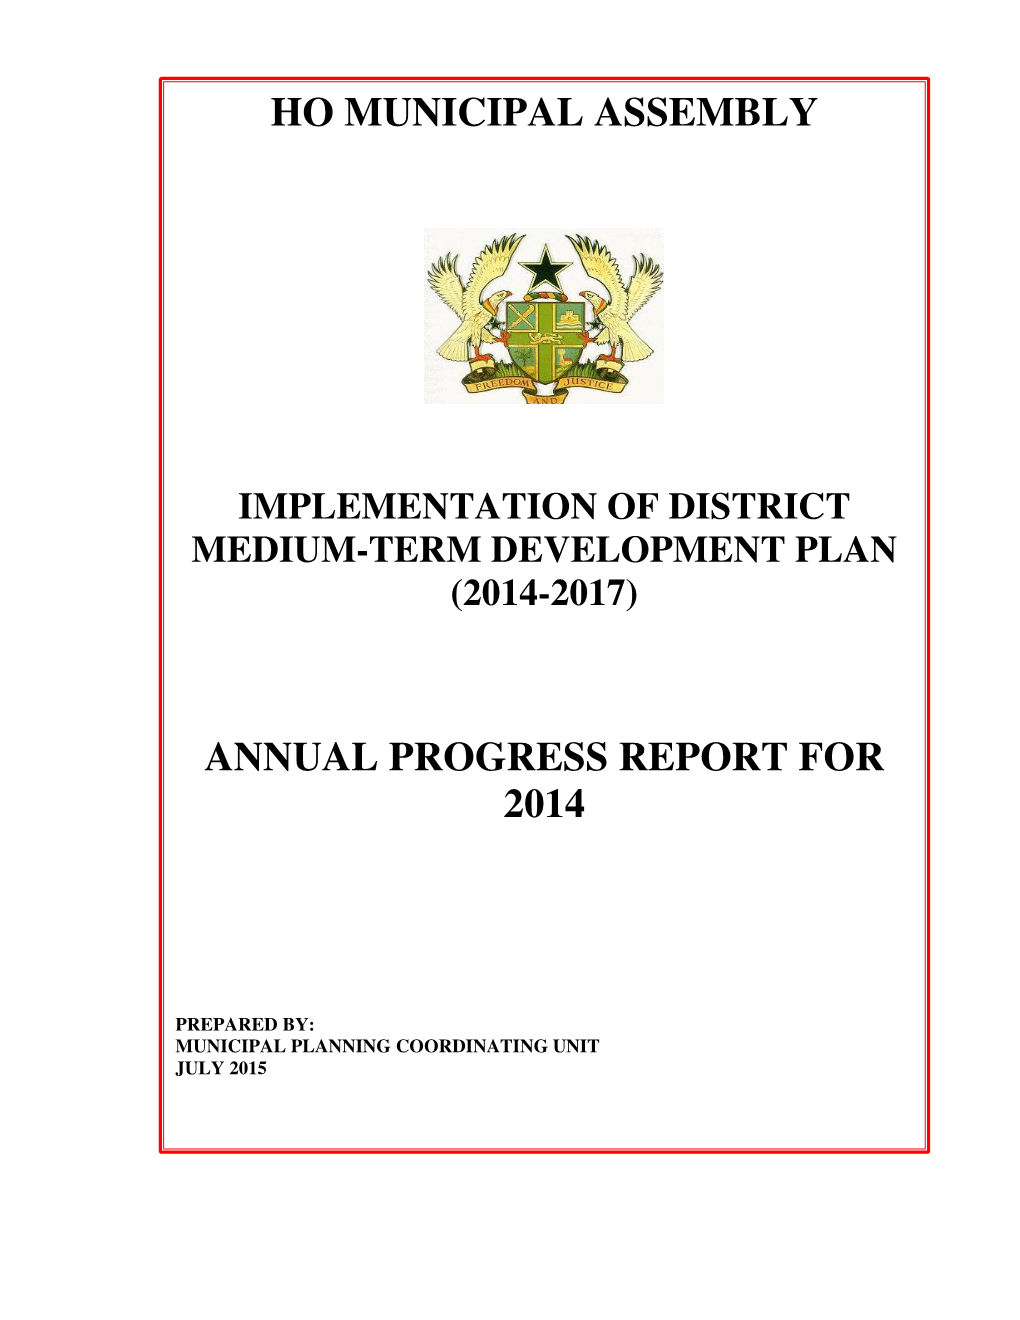 Ho Municipal Assembly Annual Progress Report for 2014